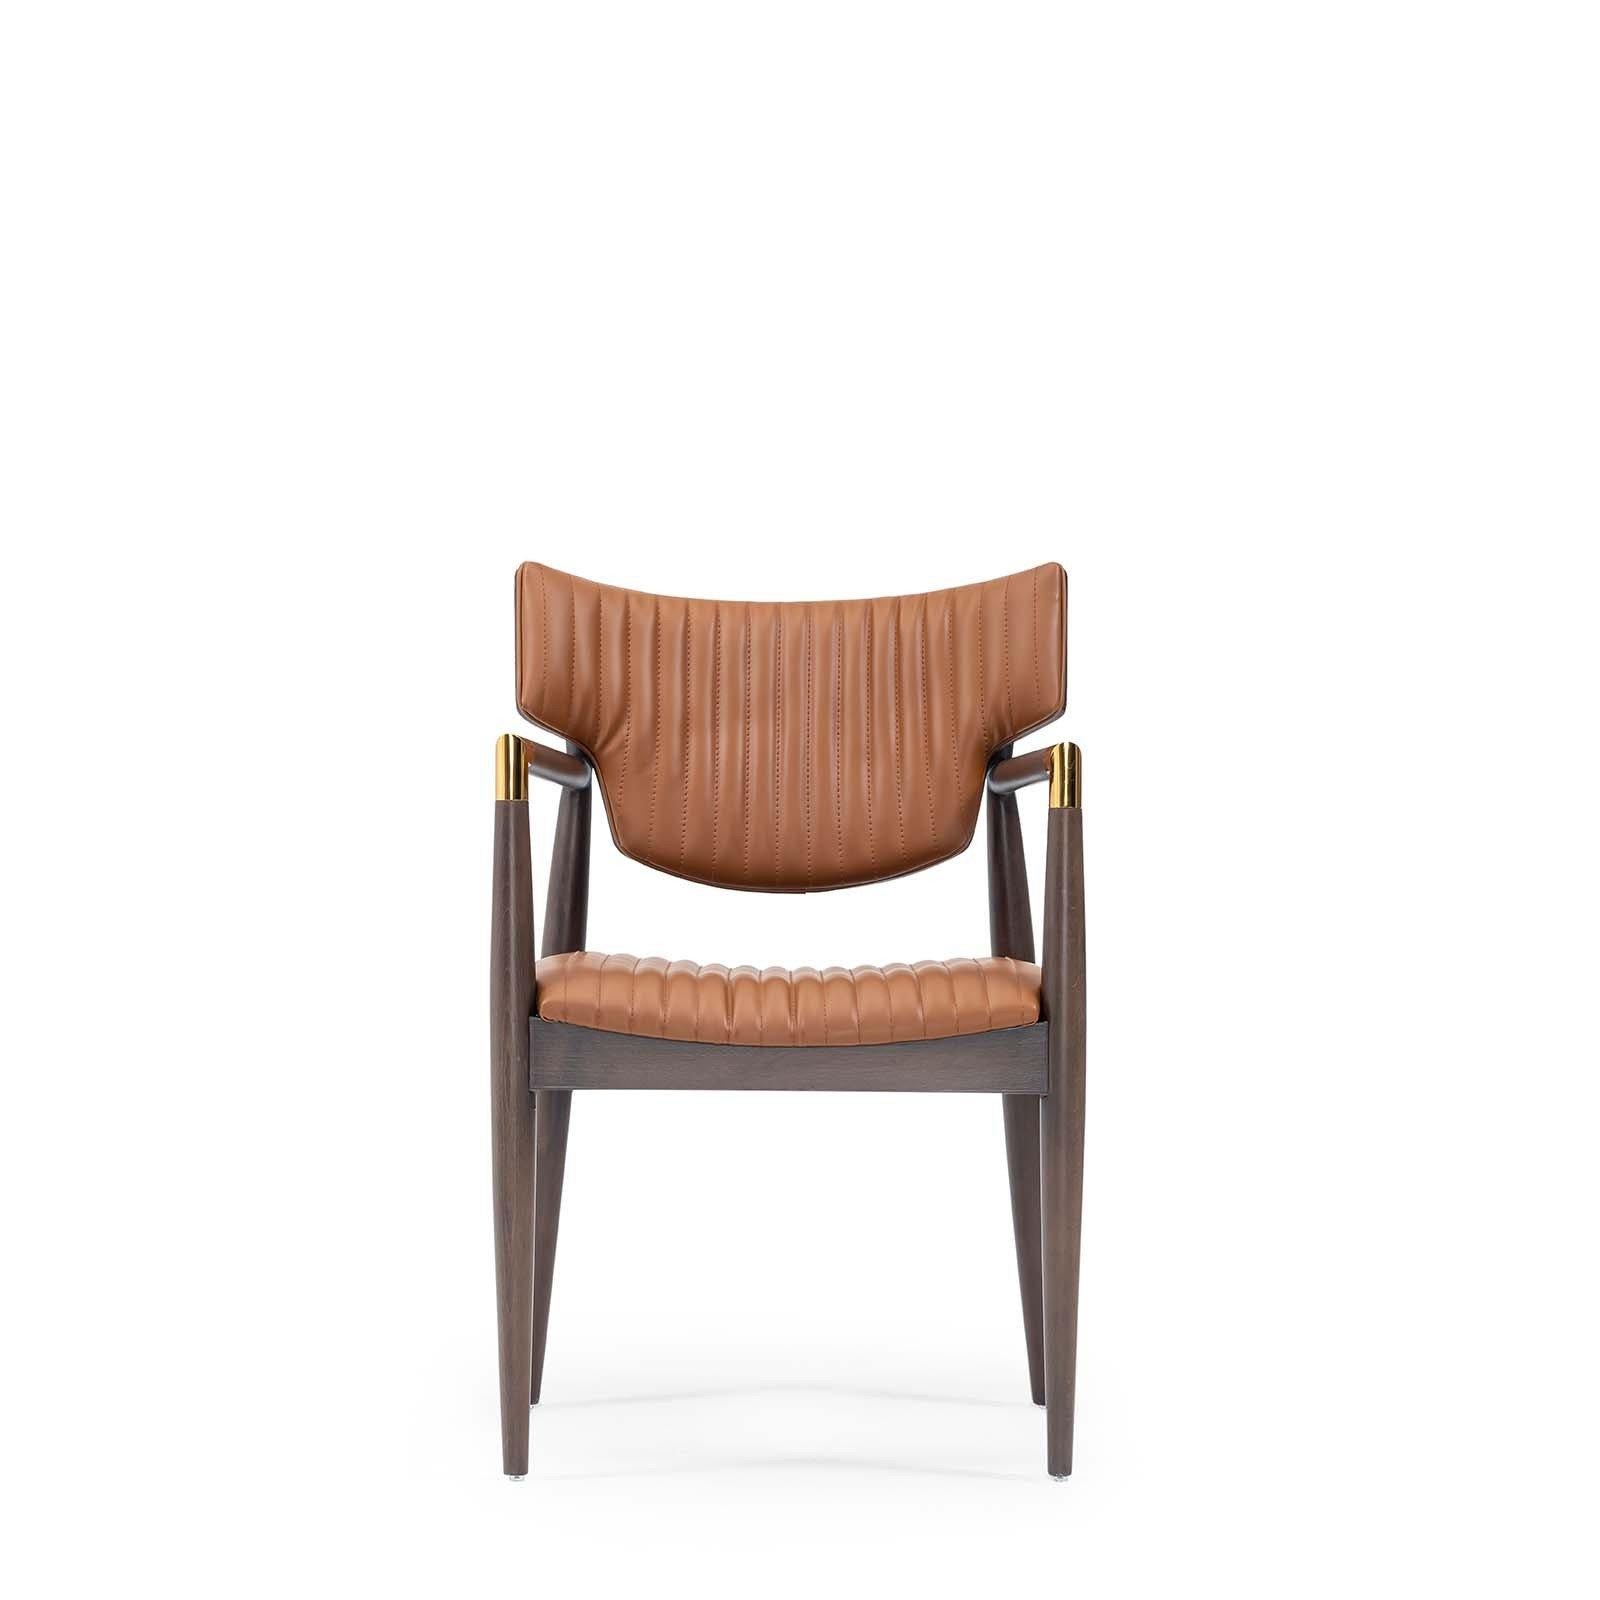 Contemporary chair with armrests, solid beech structure in walnut finish.
Expertly stitched with a modern channel design, this striking arm chair invites comfort with its supple leather. Rounded wood frame with gold detailing on the arms creates a